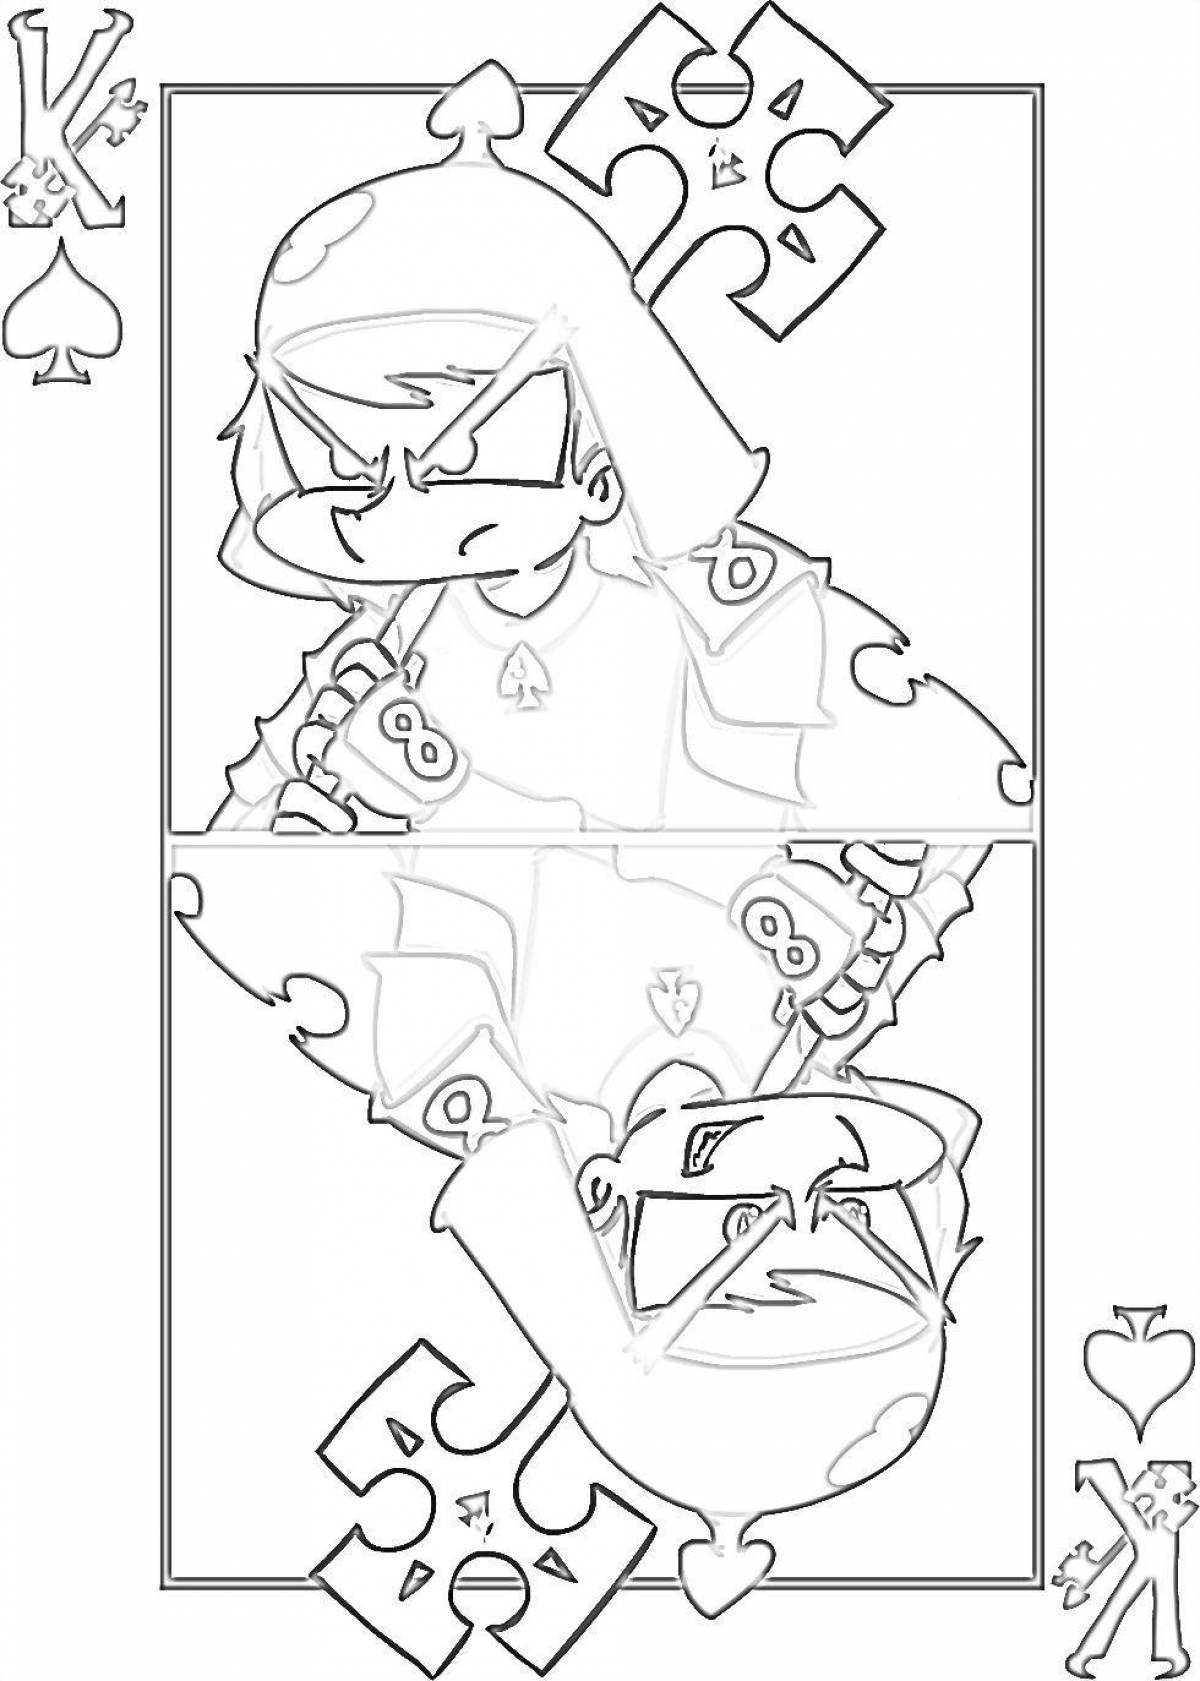 Exciting comic book coloring page 13 cards